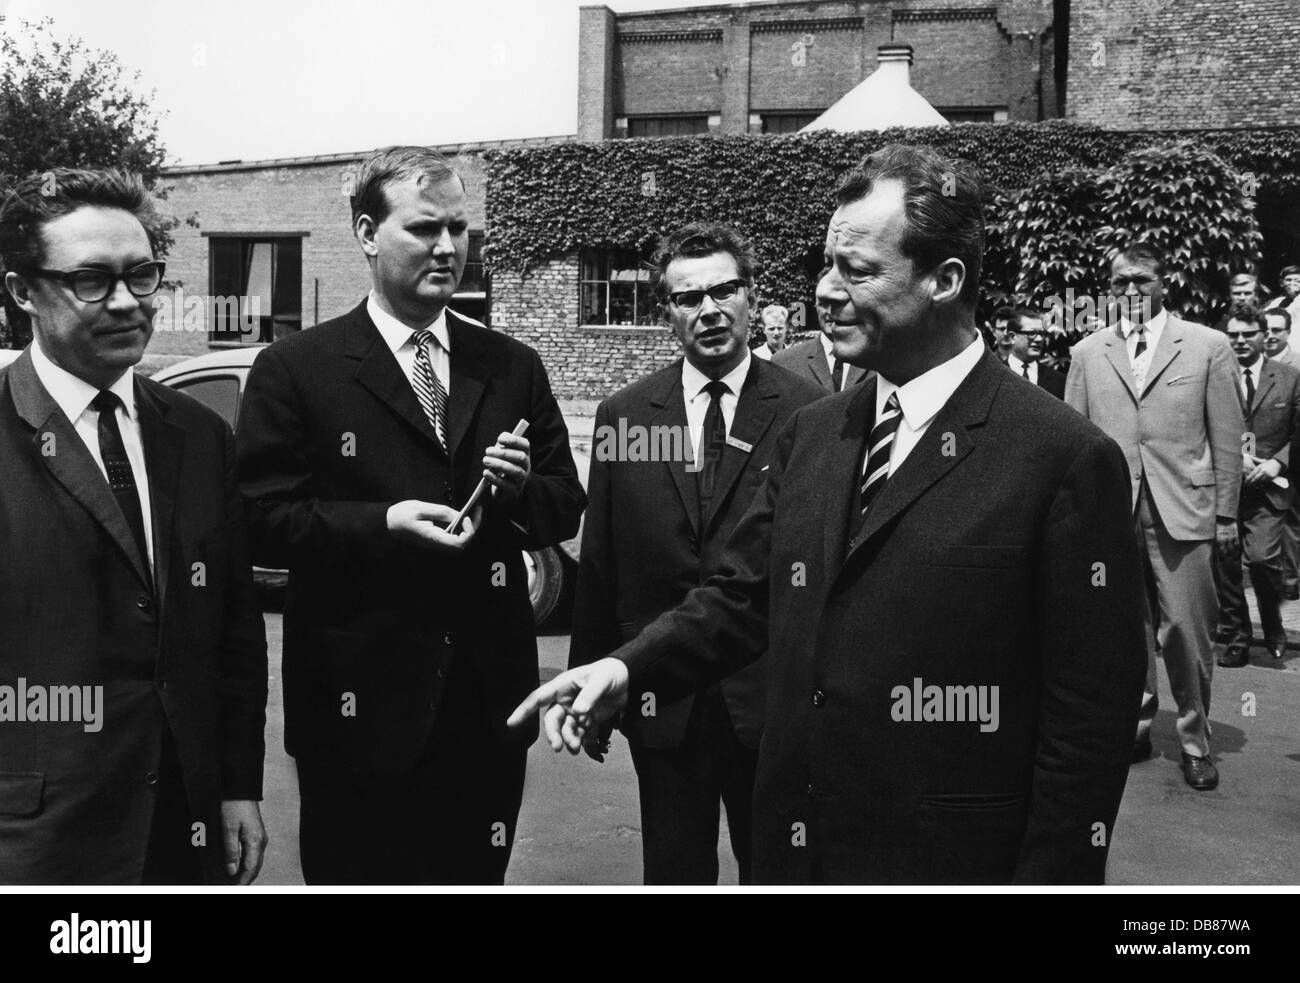 Brandt, Willy, 18.12.1913 - 8. 10.1992, German politician (SPD), Federal Chancellor 21.10.1969 - 7.5.1974, with his advisers, circa 1970, Stock Photo